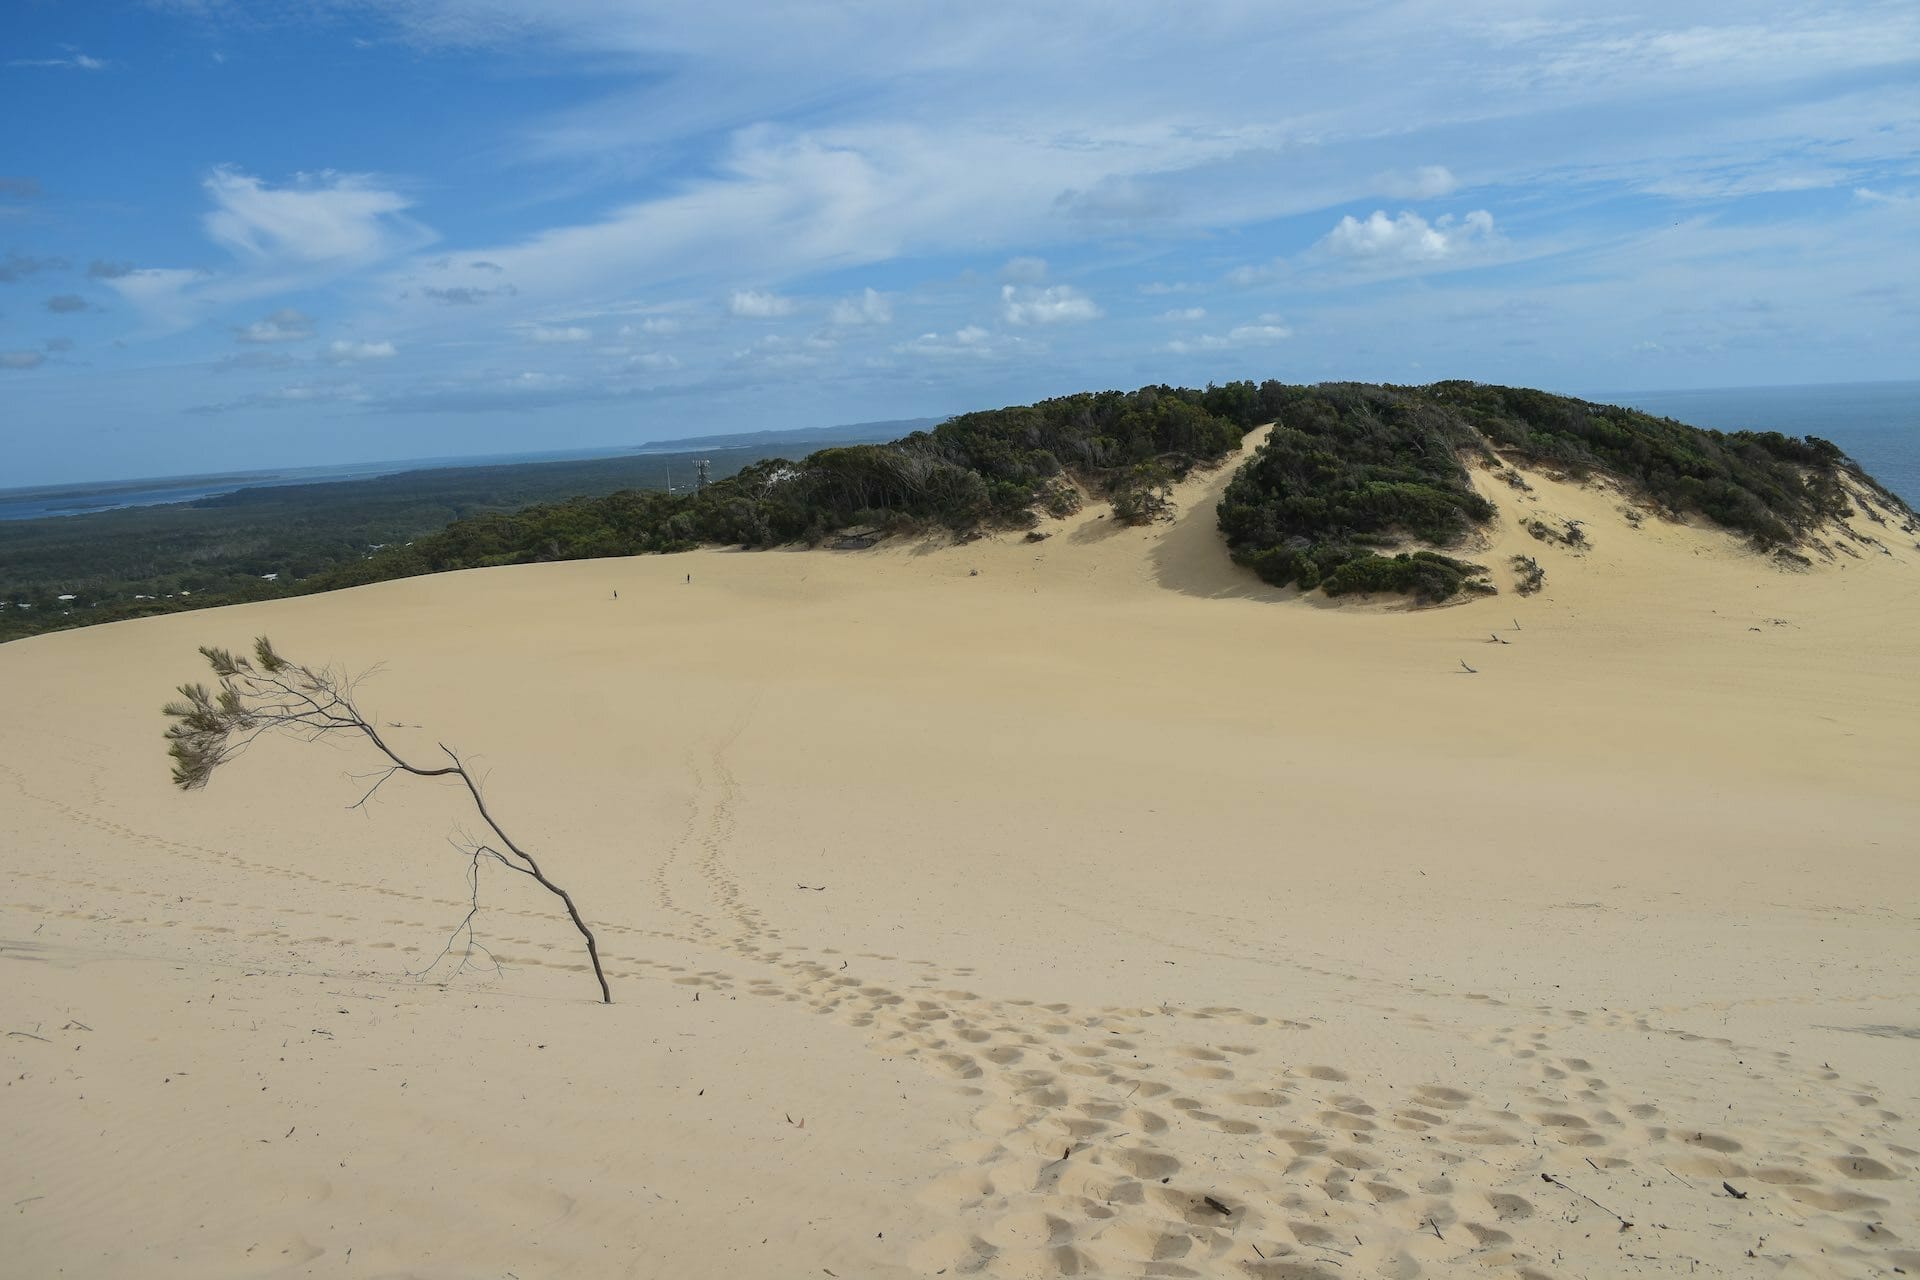 Explore Poona Lake For a Taste of The Cooloola Great Walk, Lisa Owen, Carlo Sand Blow, sand dune, beach